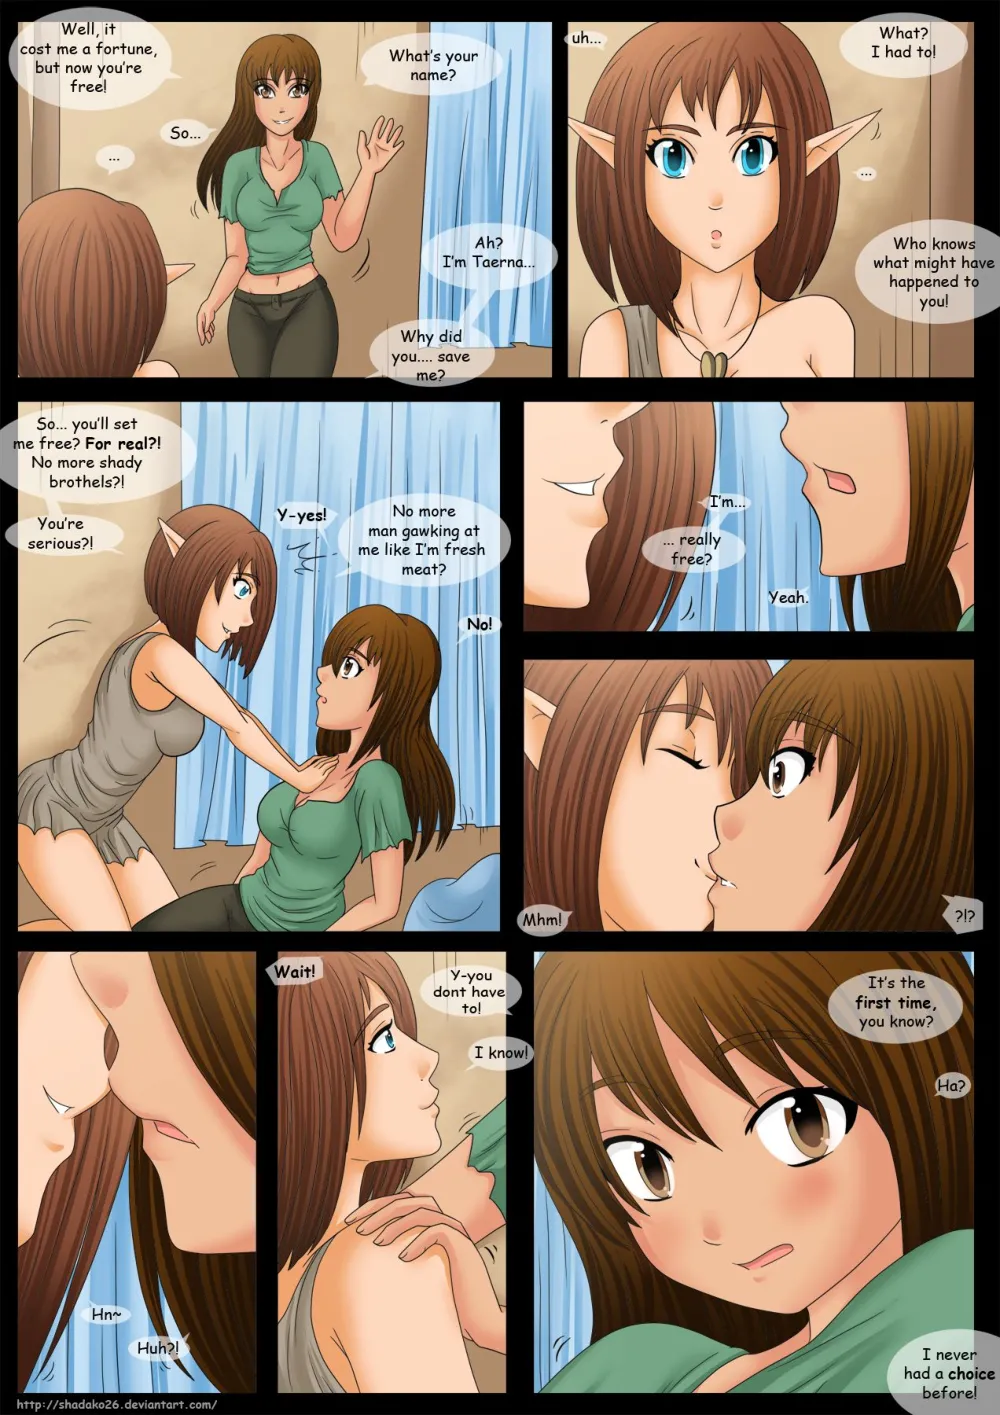 A Chance Encounter - Page 2